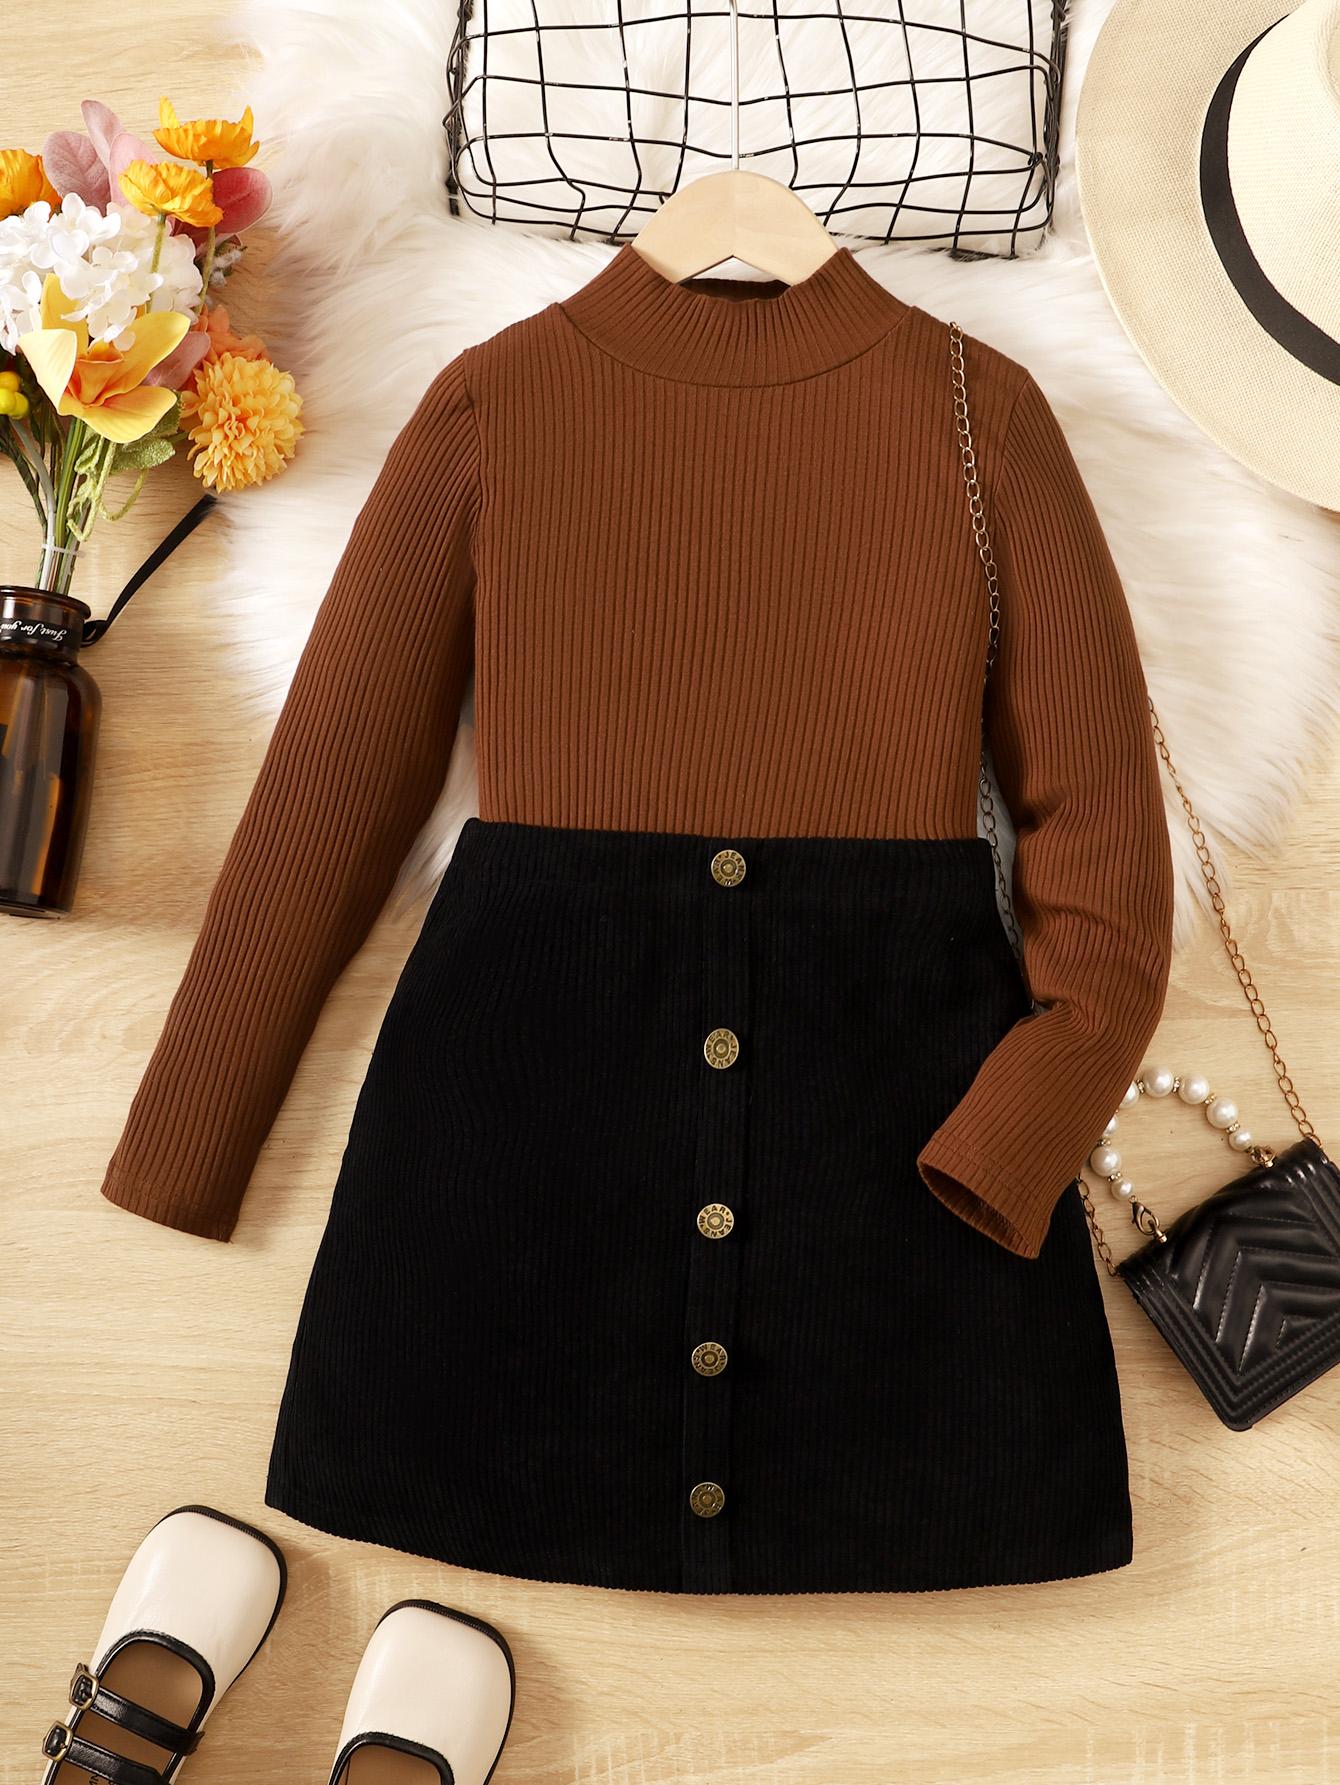 5-14Y Ready Stock Kids Clothes Girls Skirts Sets For Spring Autunmu Stand-up Collar Solid Color Tops Button Skirts 2Pcs Clothing From 5Y-14Y Brown Catpapa 462305005